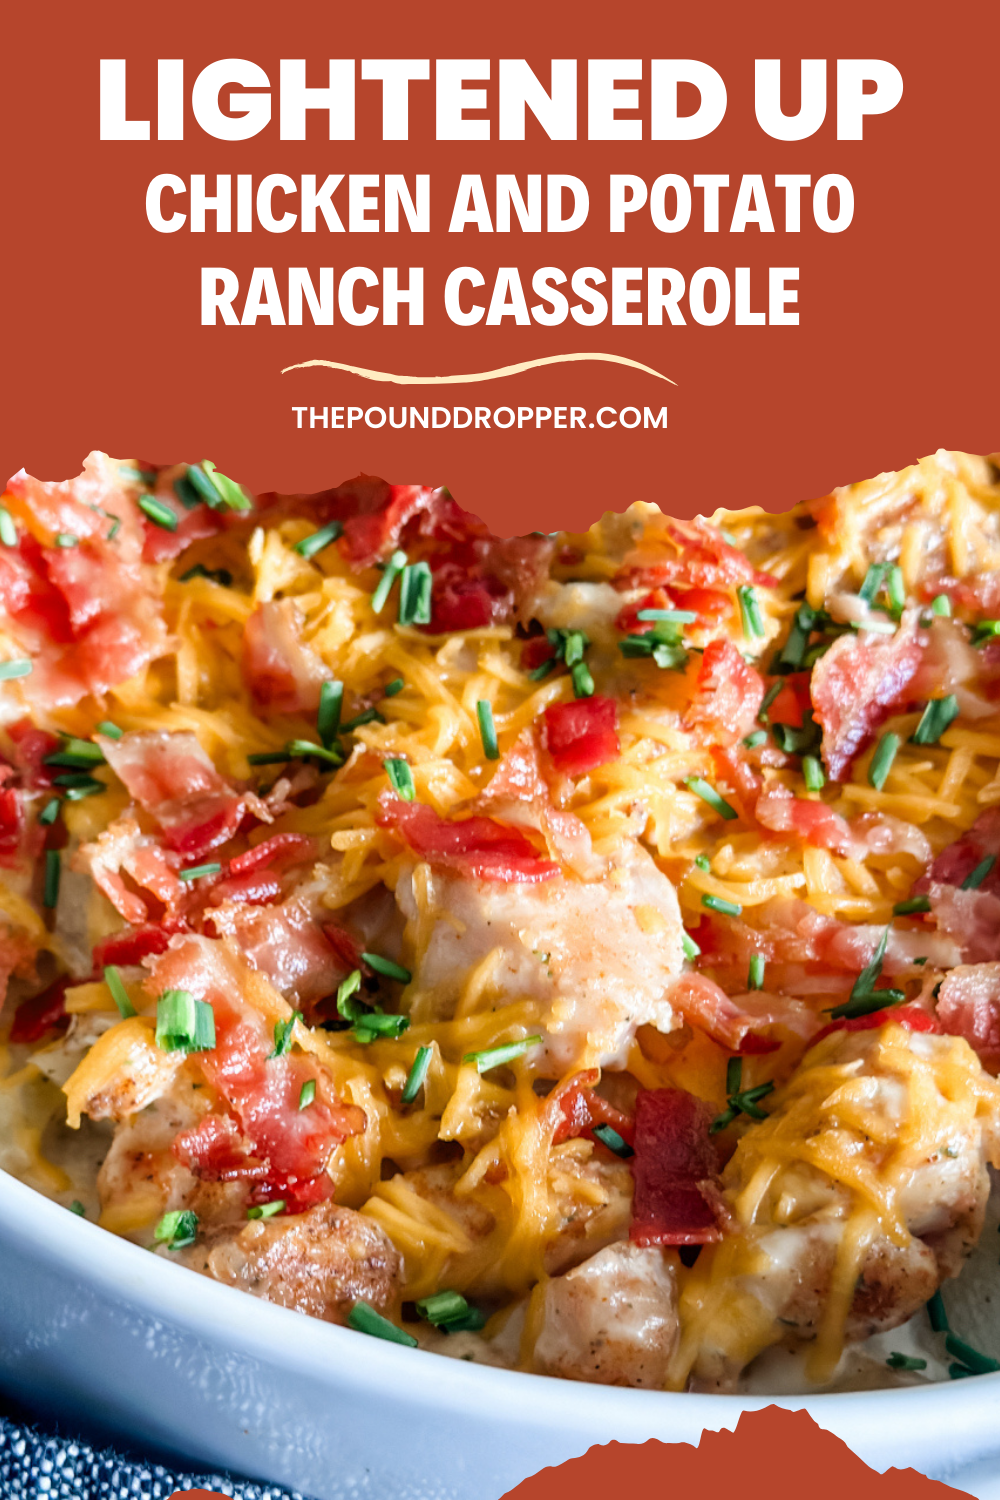 This Lightened Up Chicken and Potato Ranch Casserole is packed with protein-rich chicken, tender potatoes, and flavorful lightened up ranch dressing! It's a quick and easy casserole that your whole family will enjoy! via @pounddropper